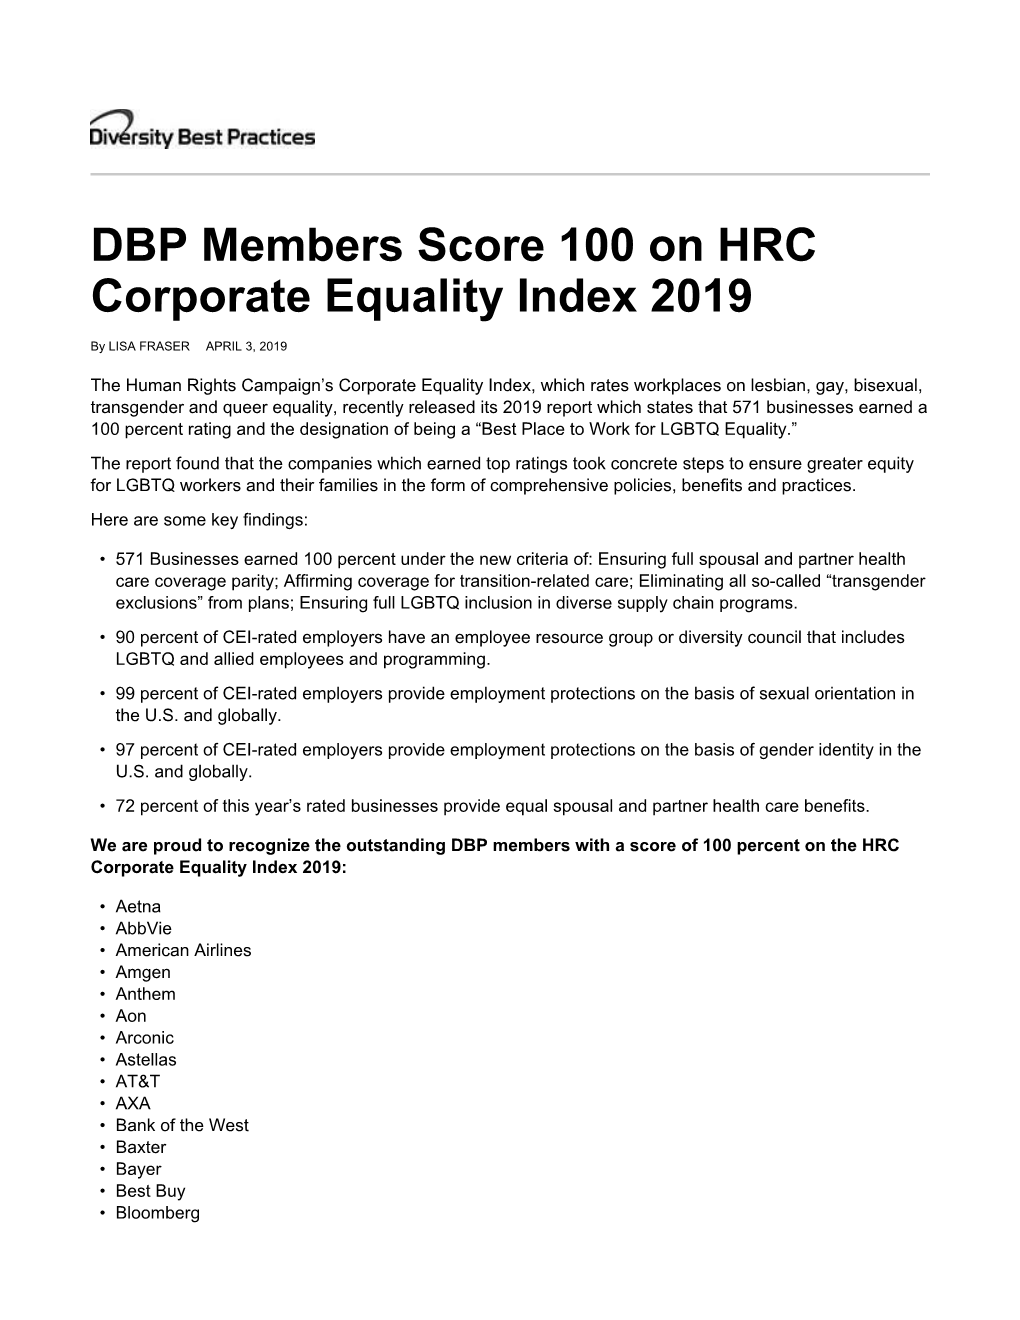 DBP Members Score 100 on HRC Corporate Equality Index 2019